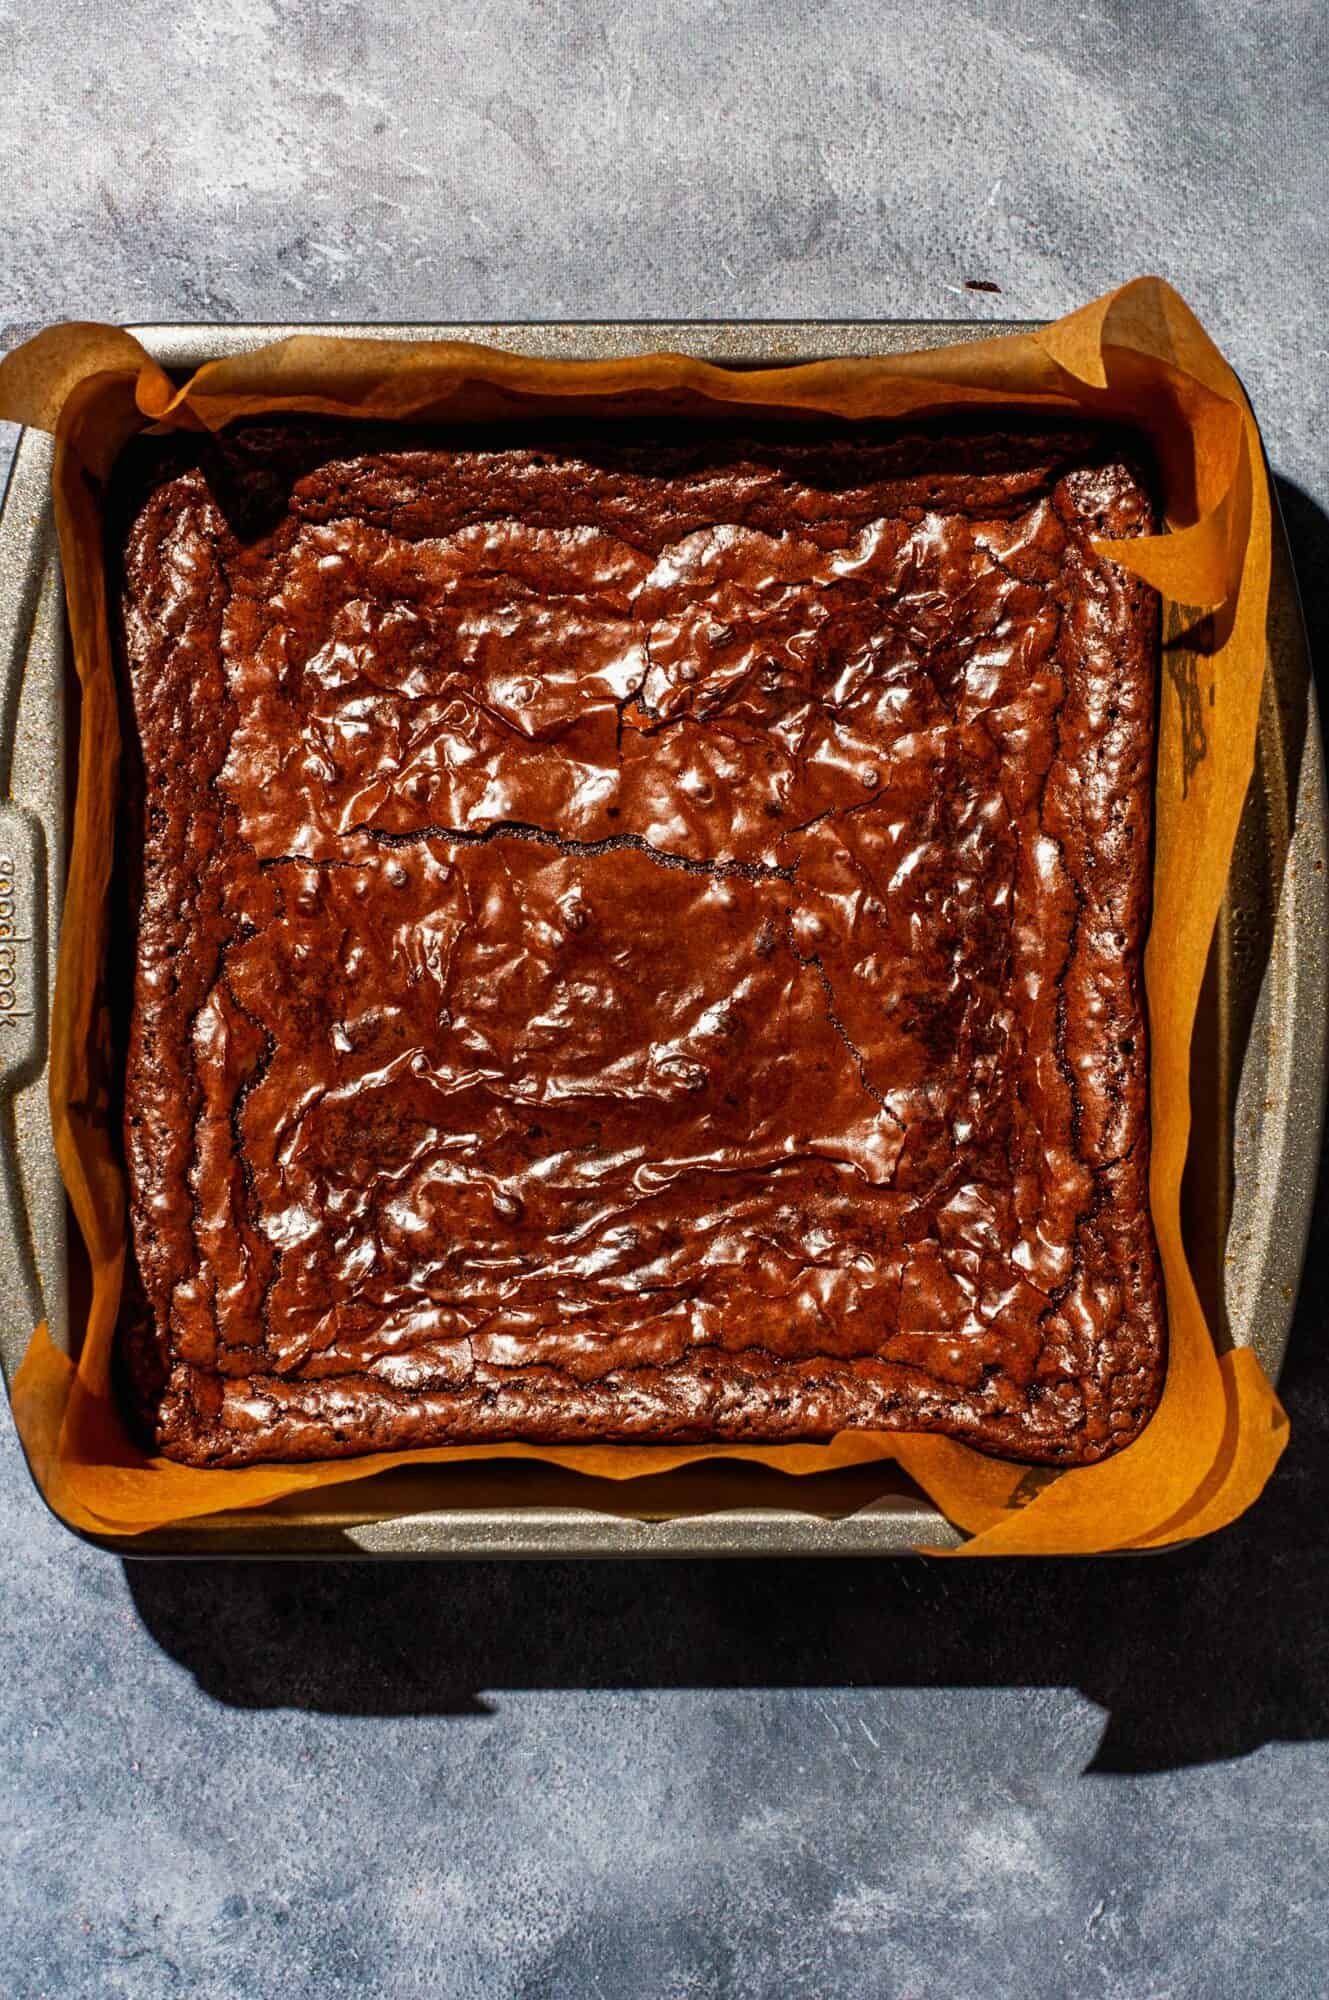 Overhead of cooked brownies in pan, showing crackly shiny texture of the top of the brownies.